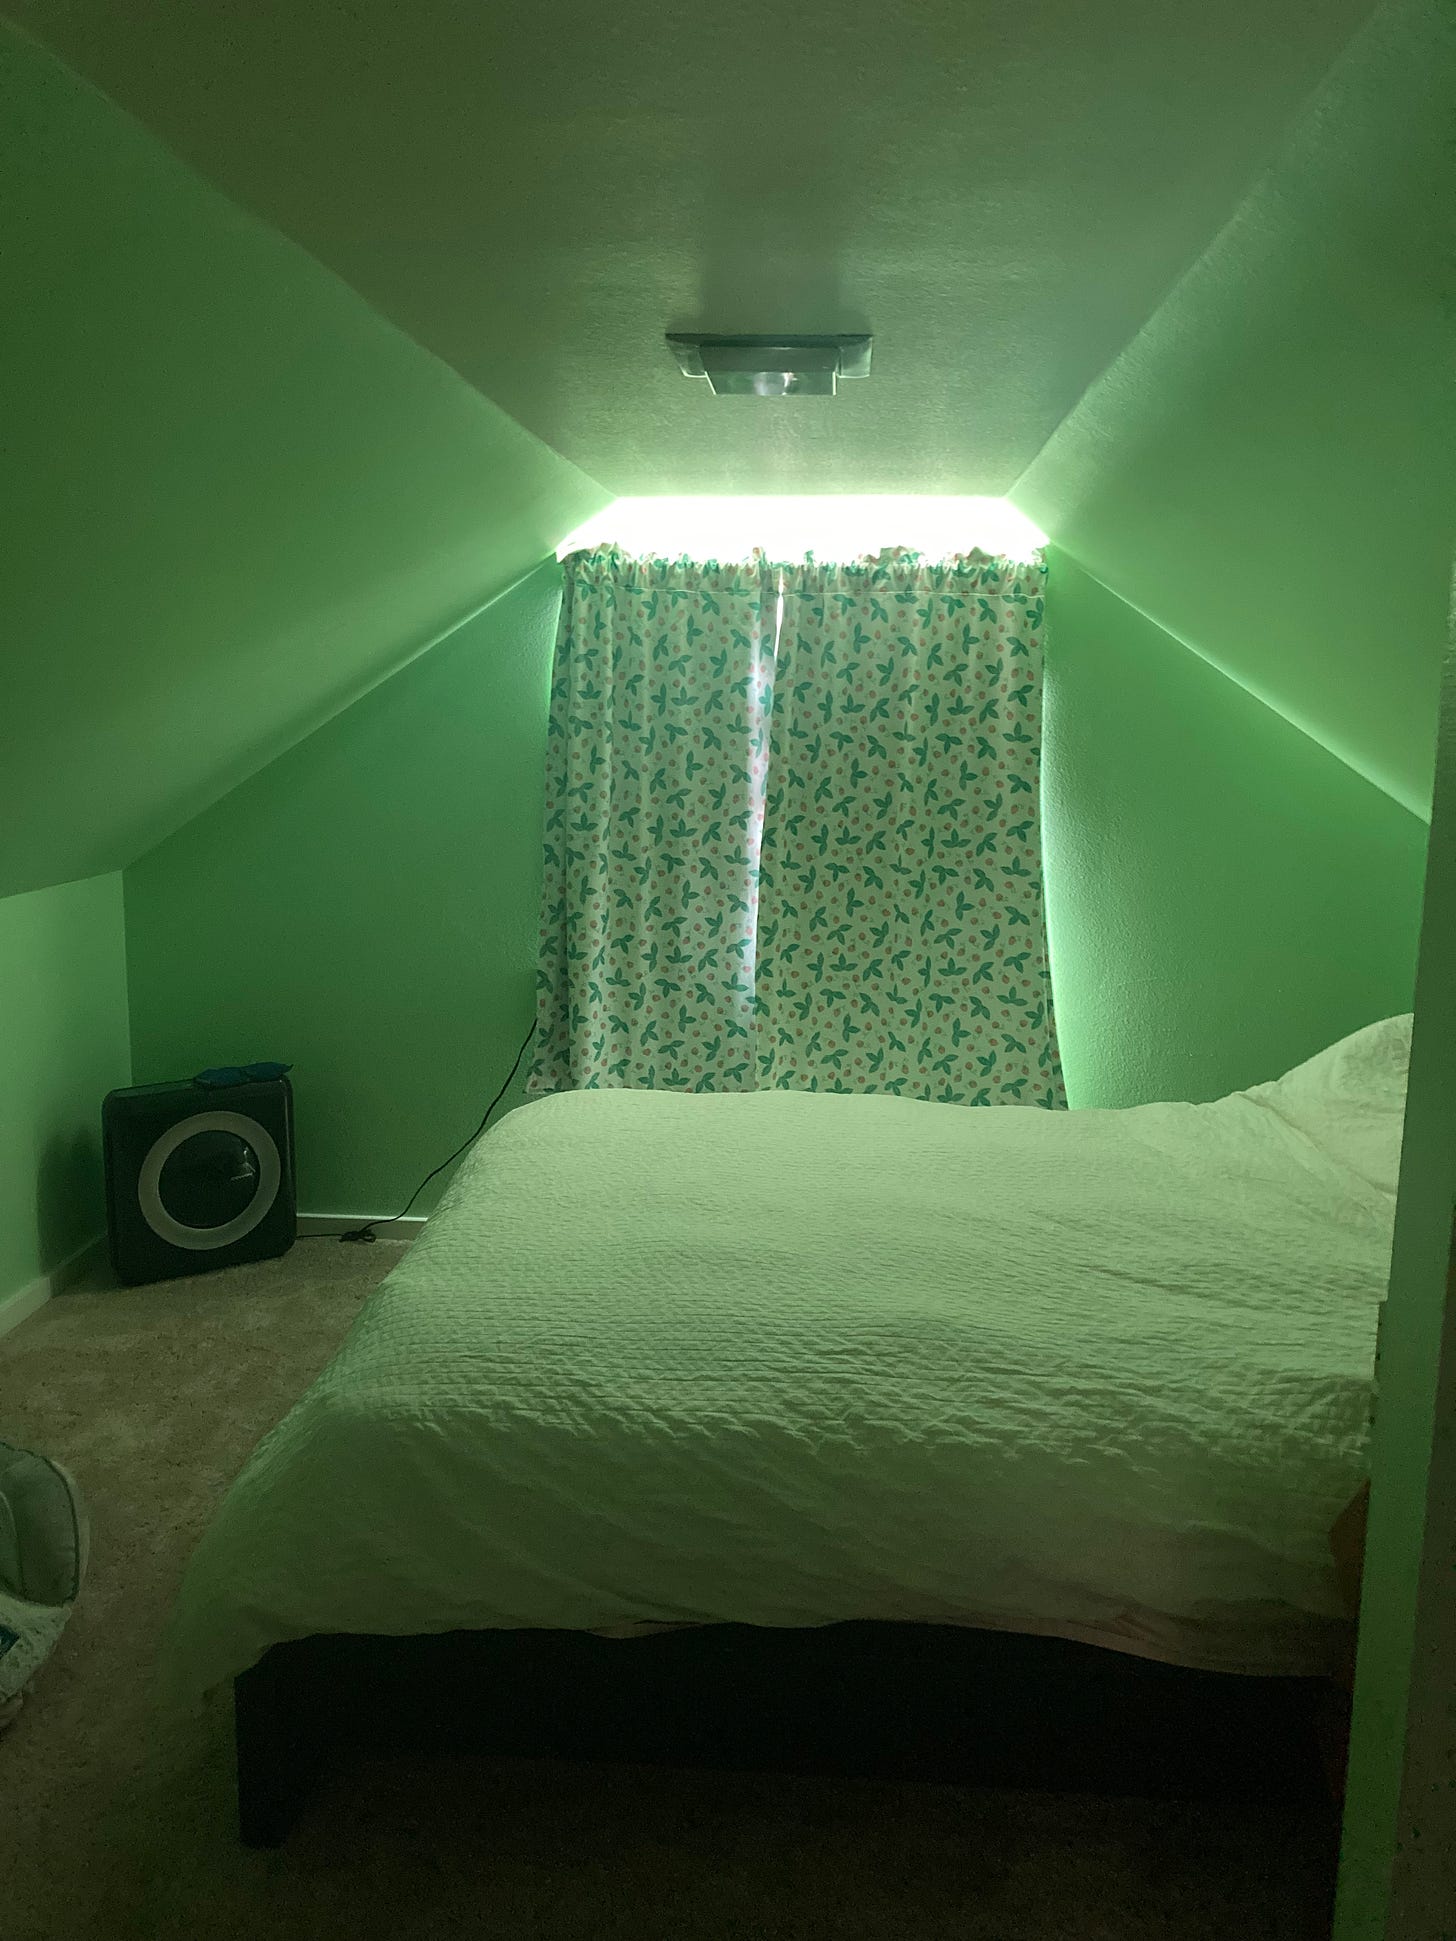 A small room with slanted ceilings and light green walls. There is a bed, an air purifier in the corner, and not much else.